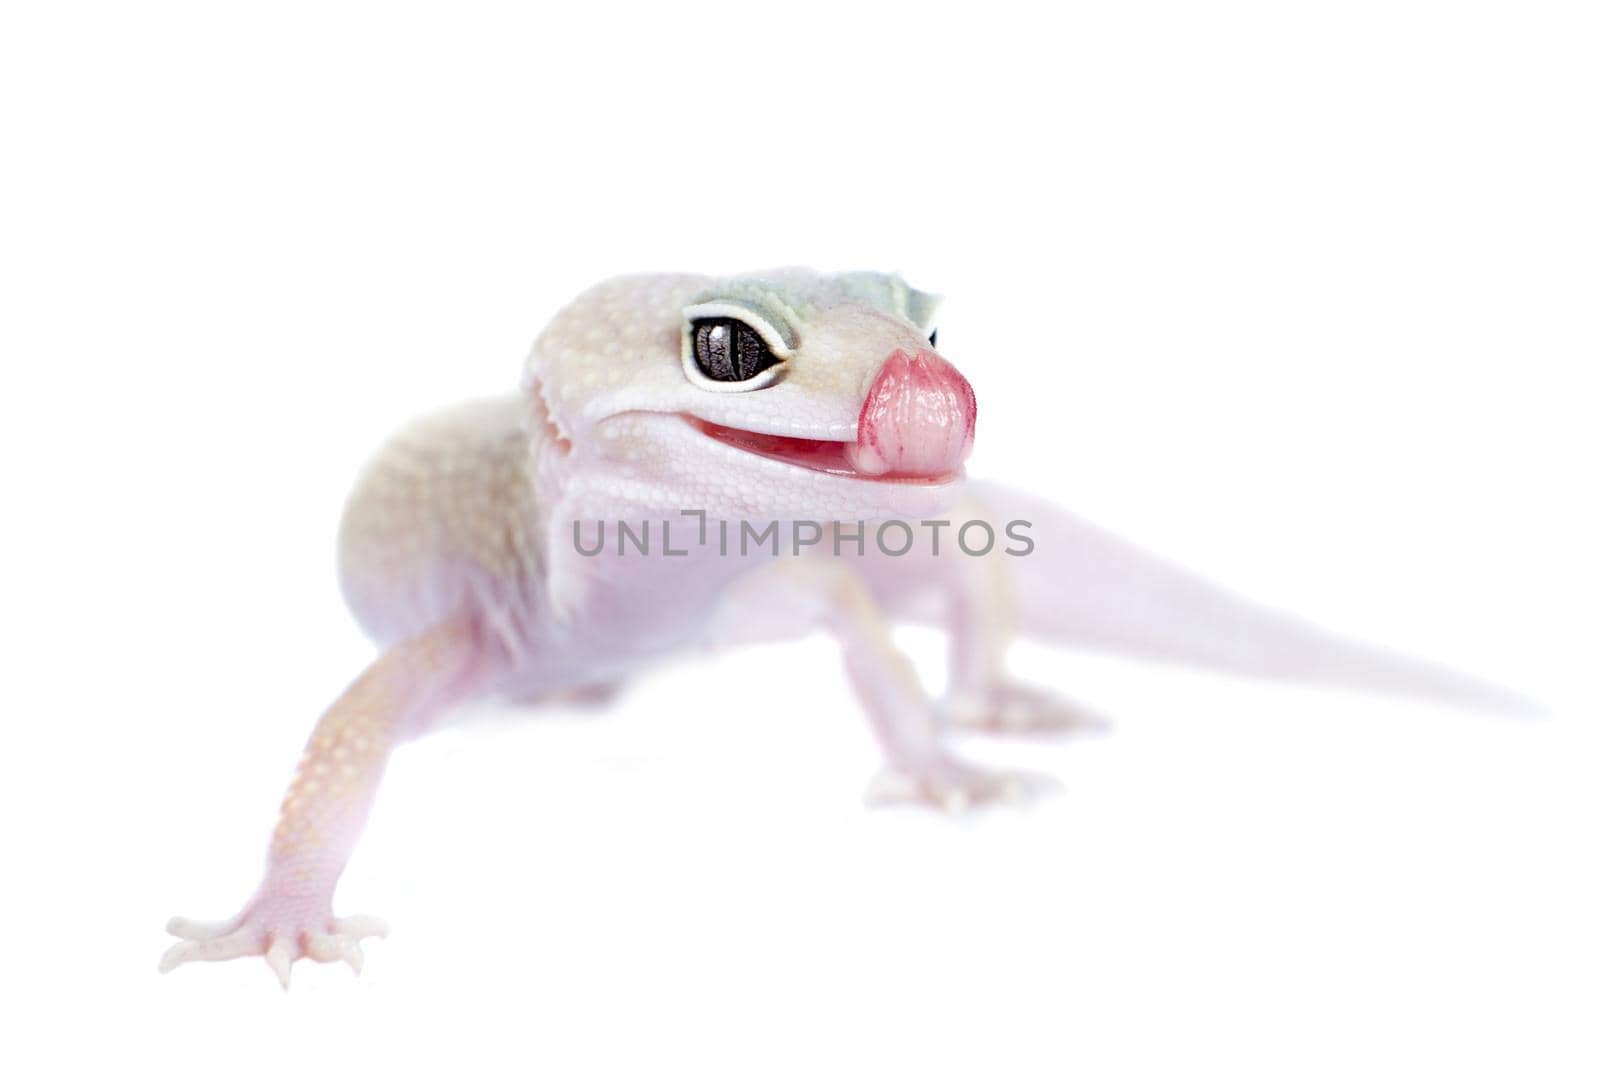 Leopard Gecko with licking itself on a white background by RosaJay